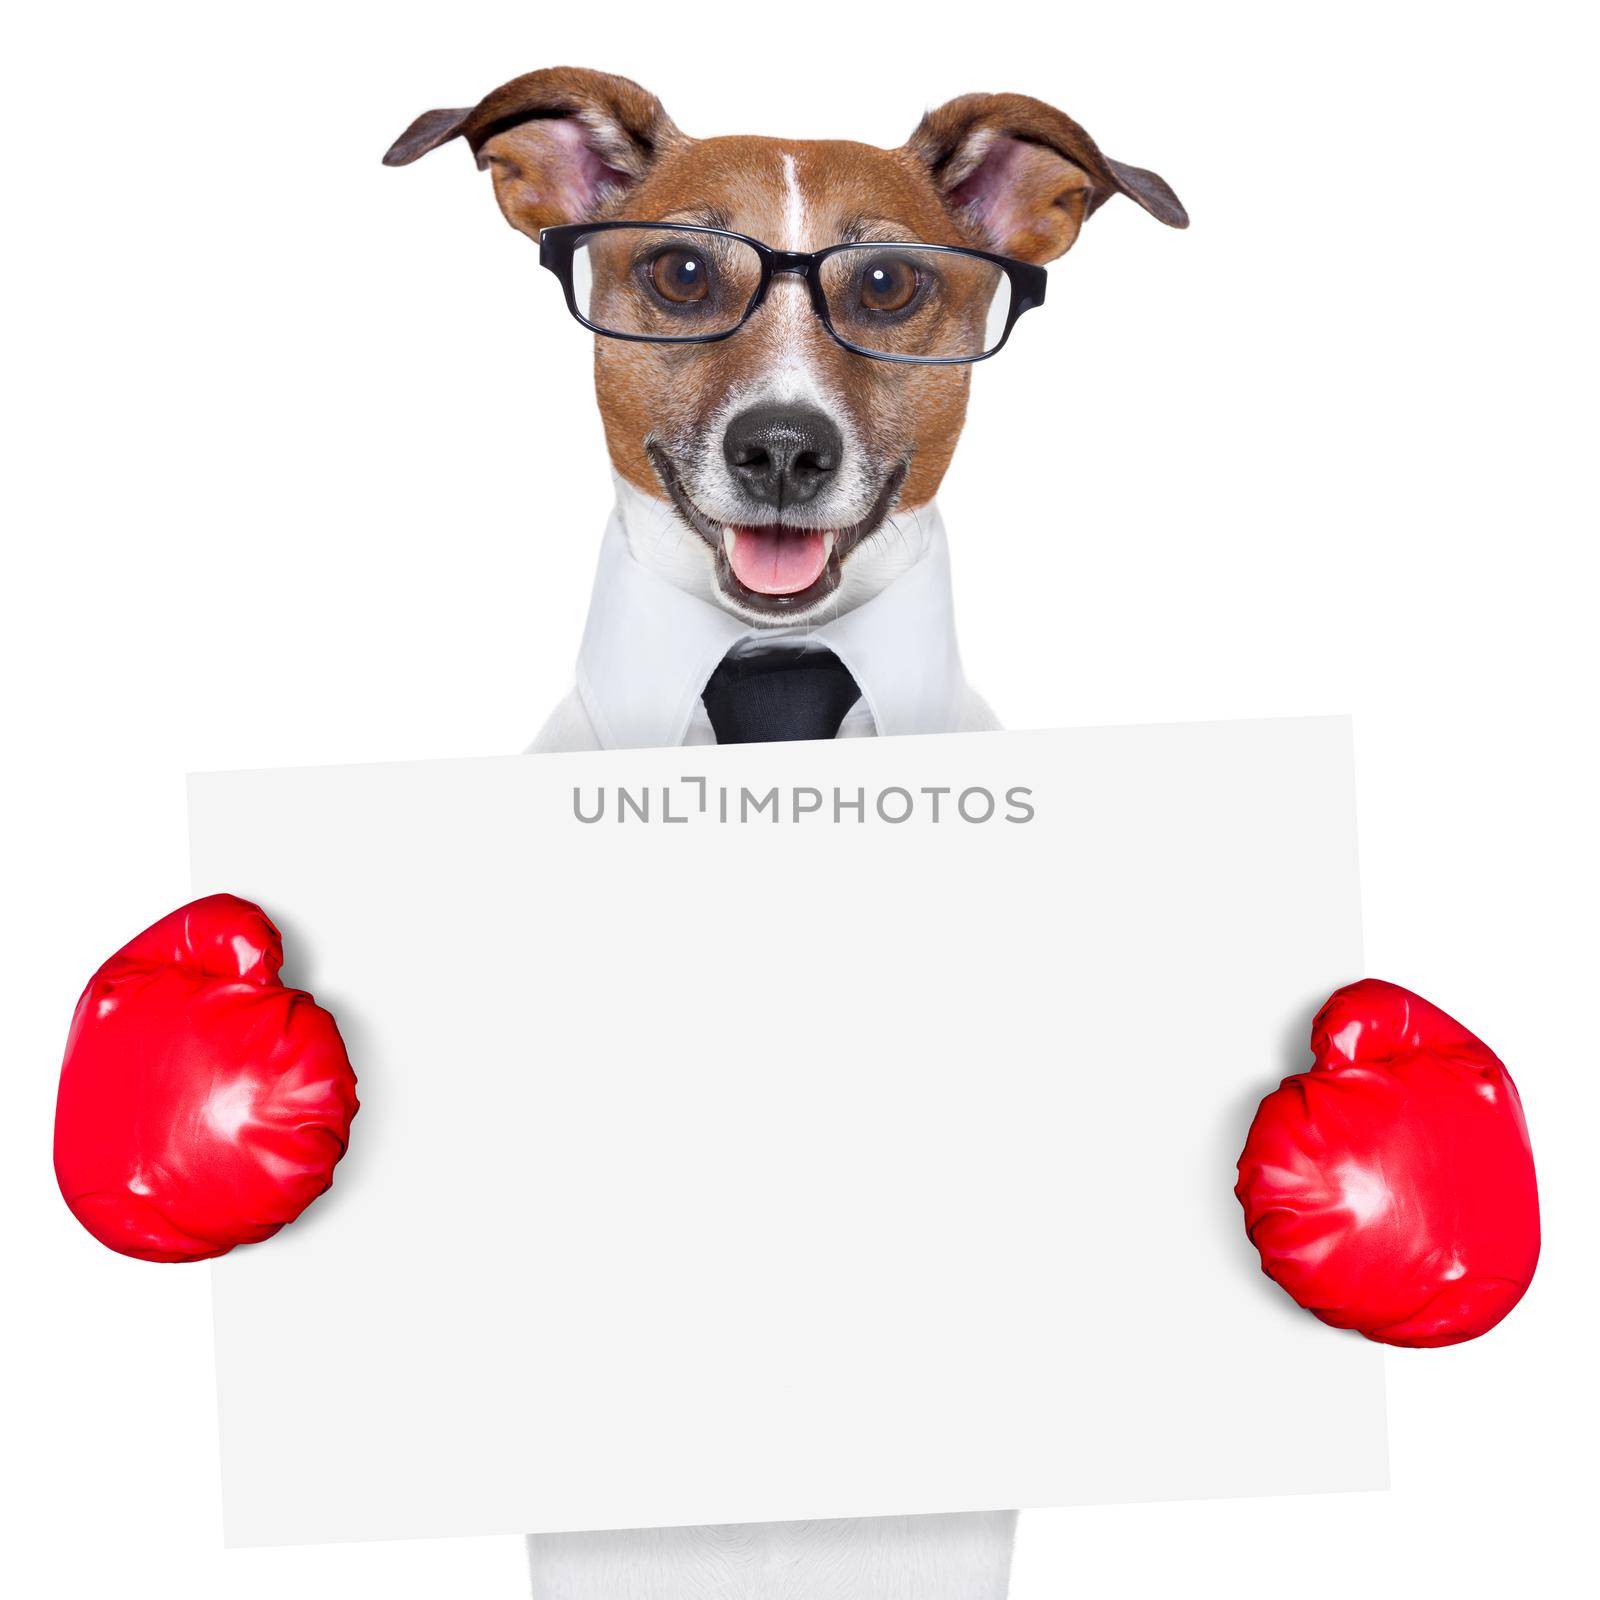 boxing business dog behind a white banner